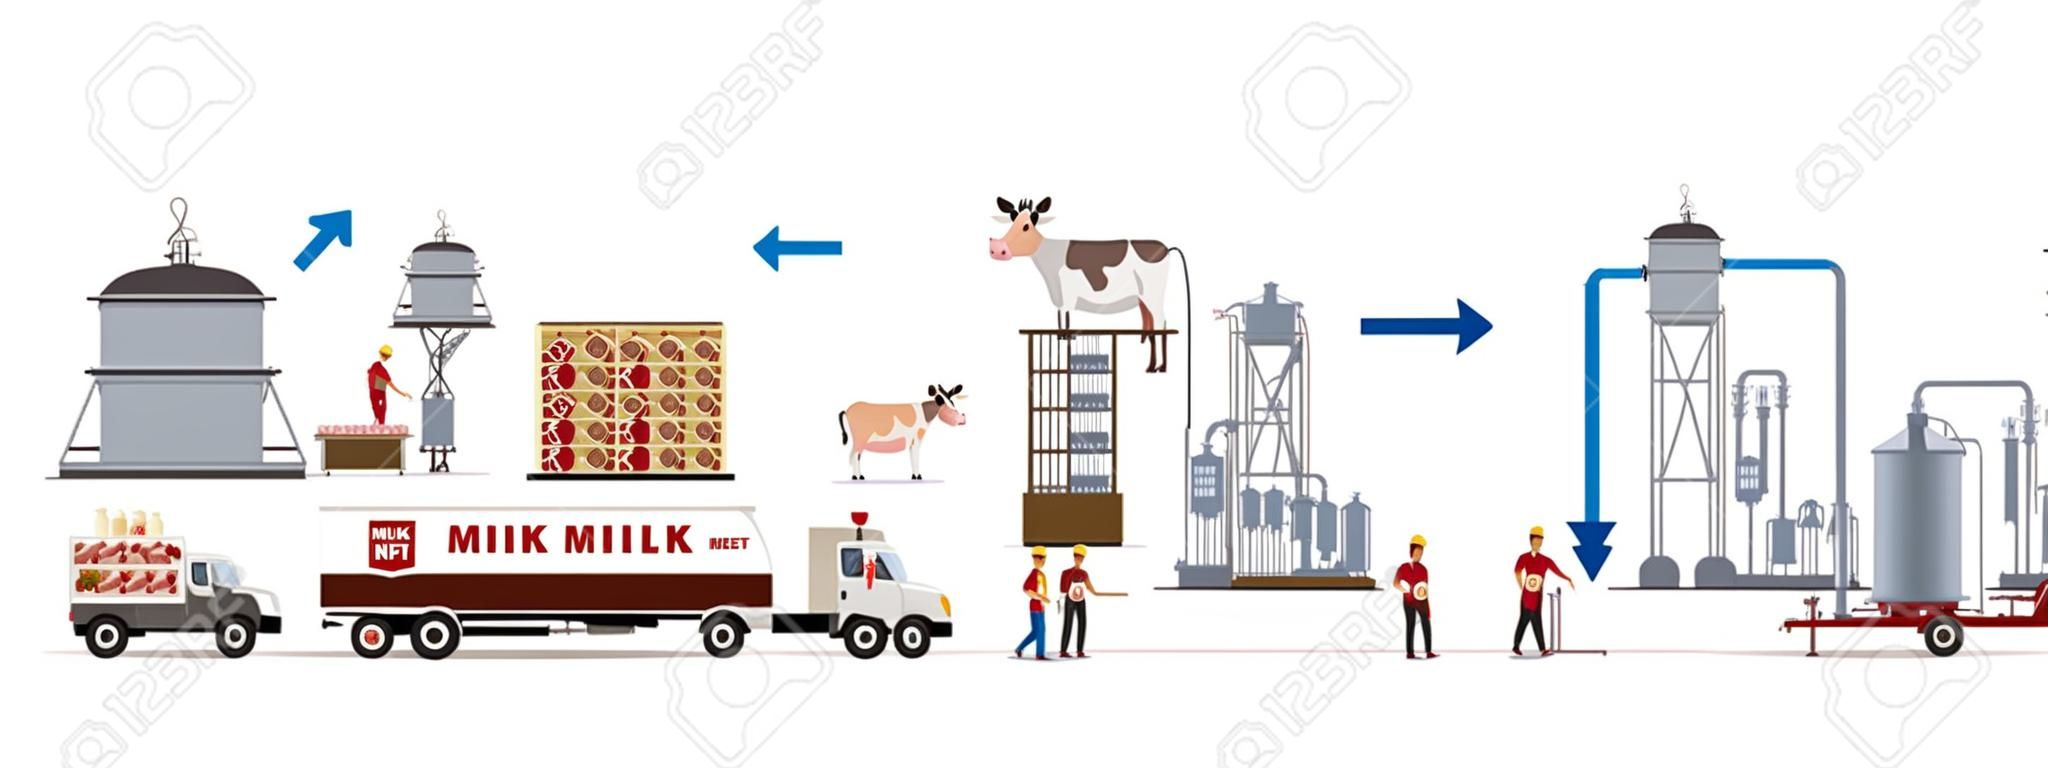 Milk and meat factory with automatic machines and workers. Vector illustration.